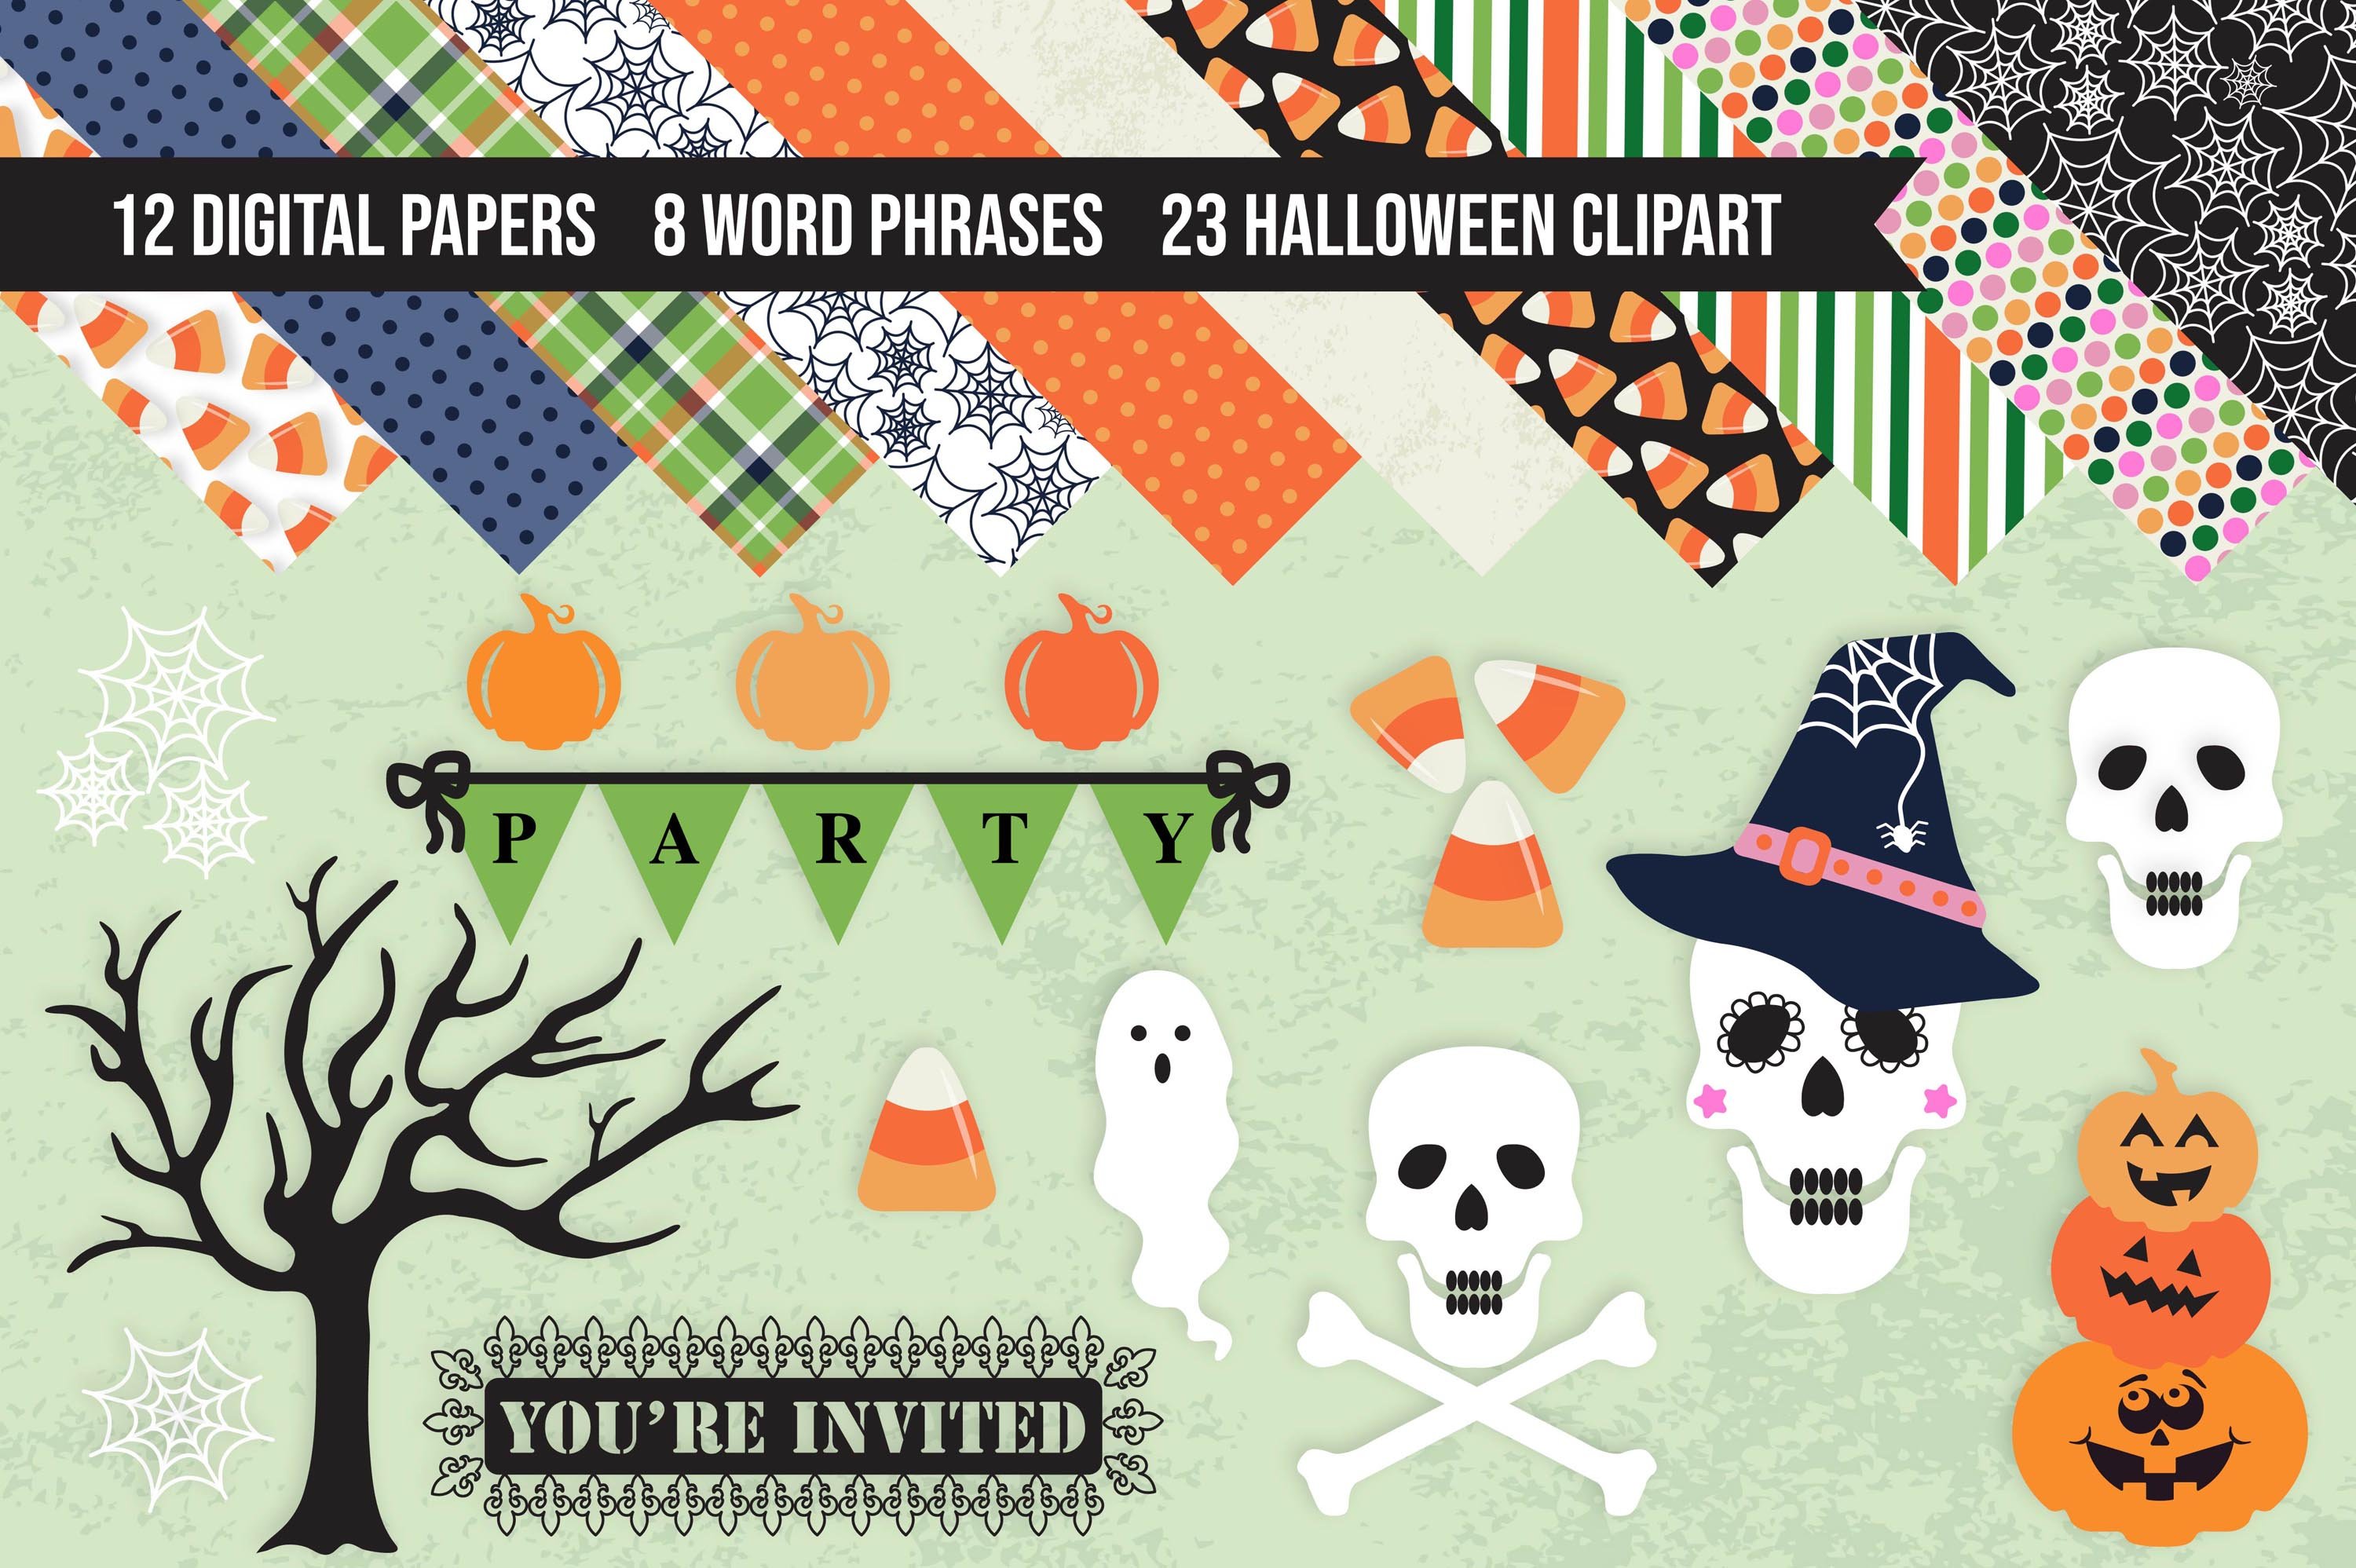 Halloween Clipart & Digital Papers cover image.